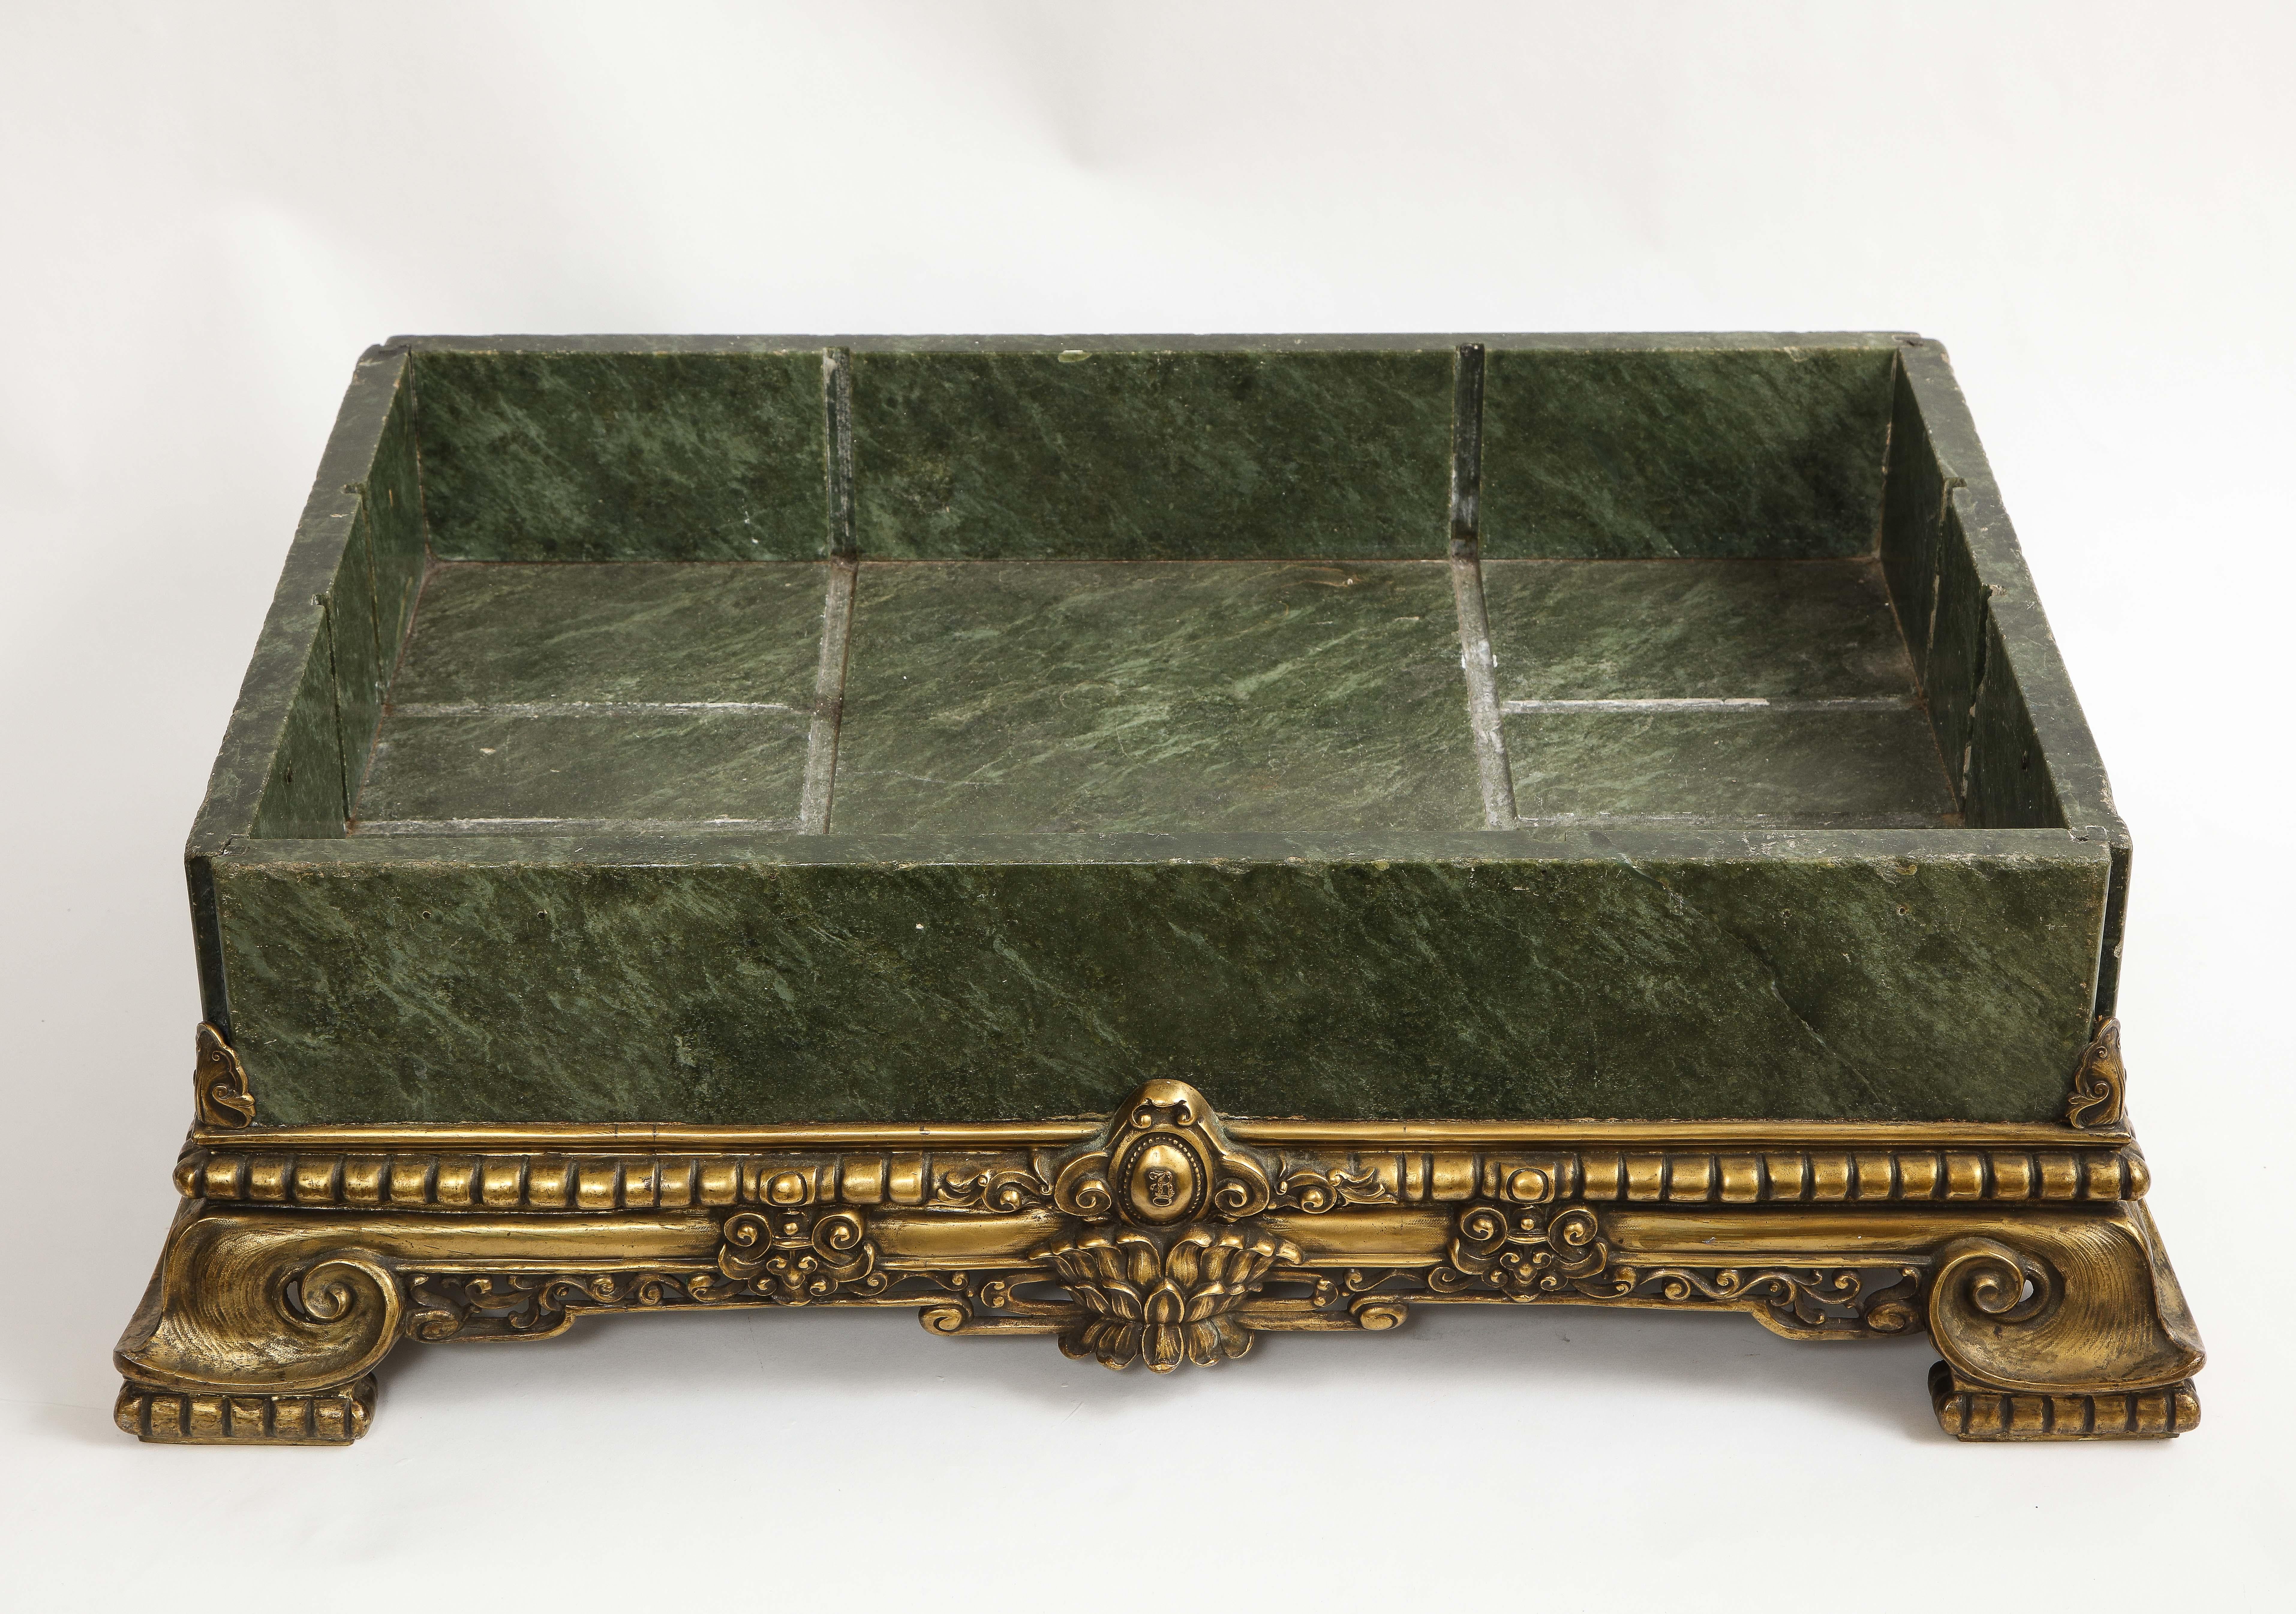 A Large 19th century Russian Louis XVI Style dore bronze mounted aventurine Hand-Carved Centerpiece. The mottled green appearance of the aventurine is truly beautiful. The rectangular piece of stone is hand-carved and further hand-polished, then